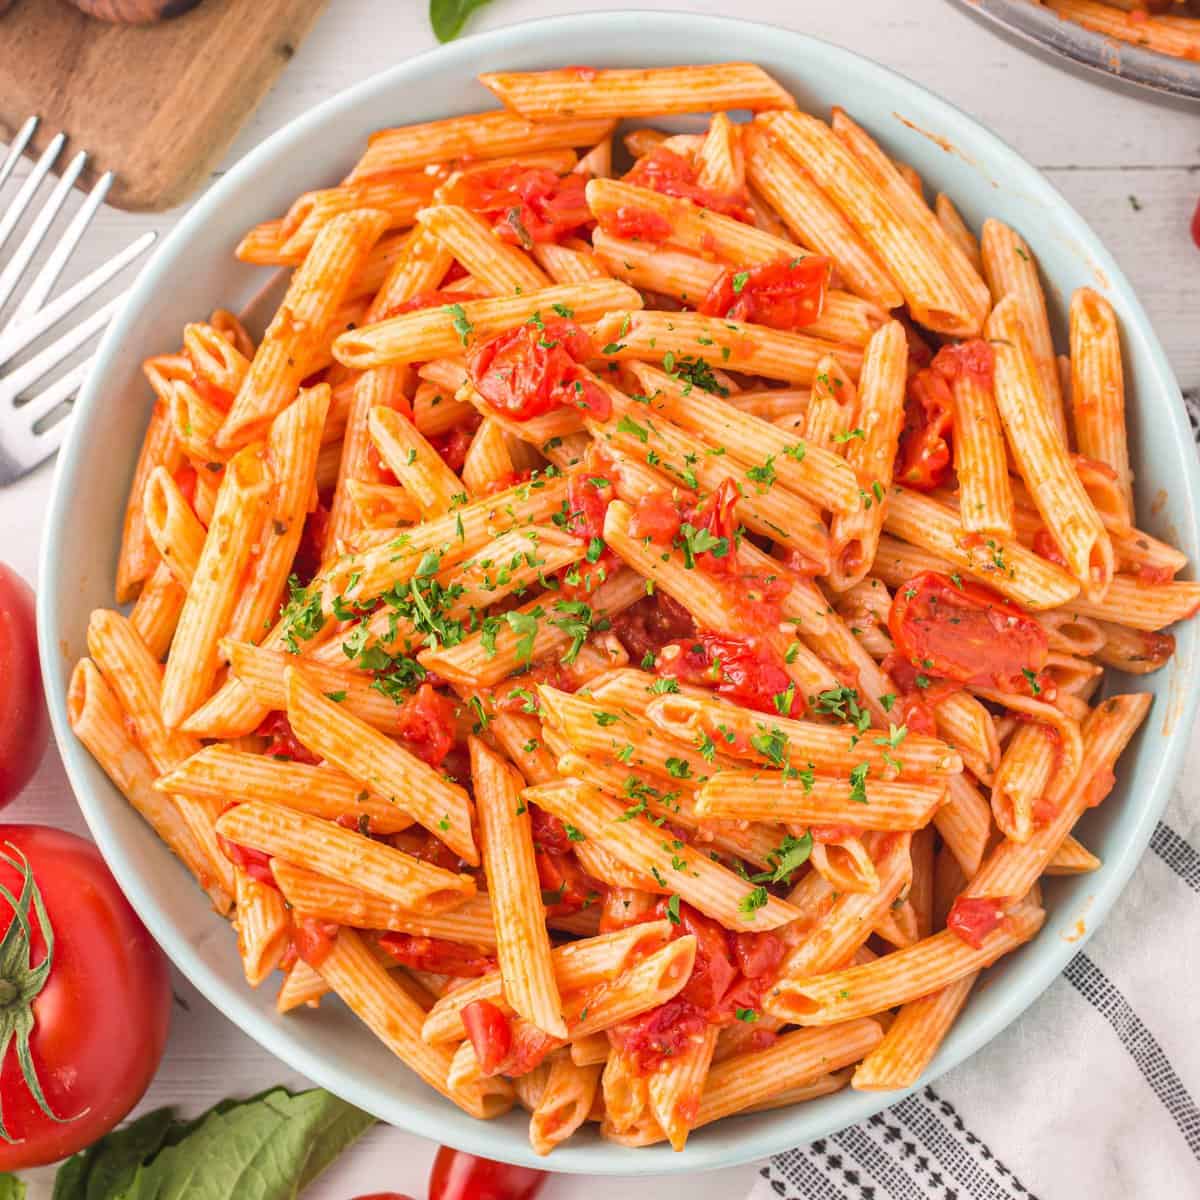 Penne Pasta with Homemade Tomato Sauce